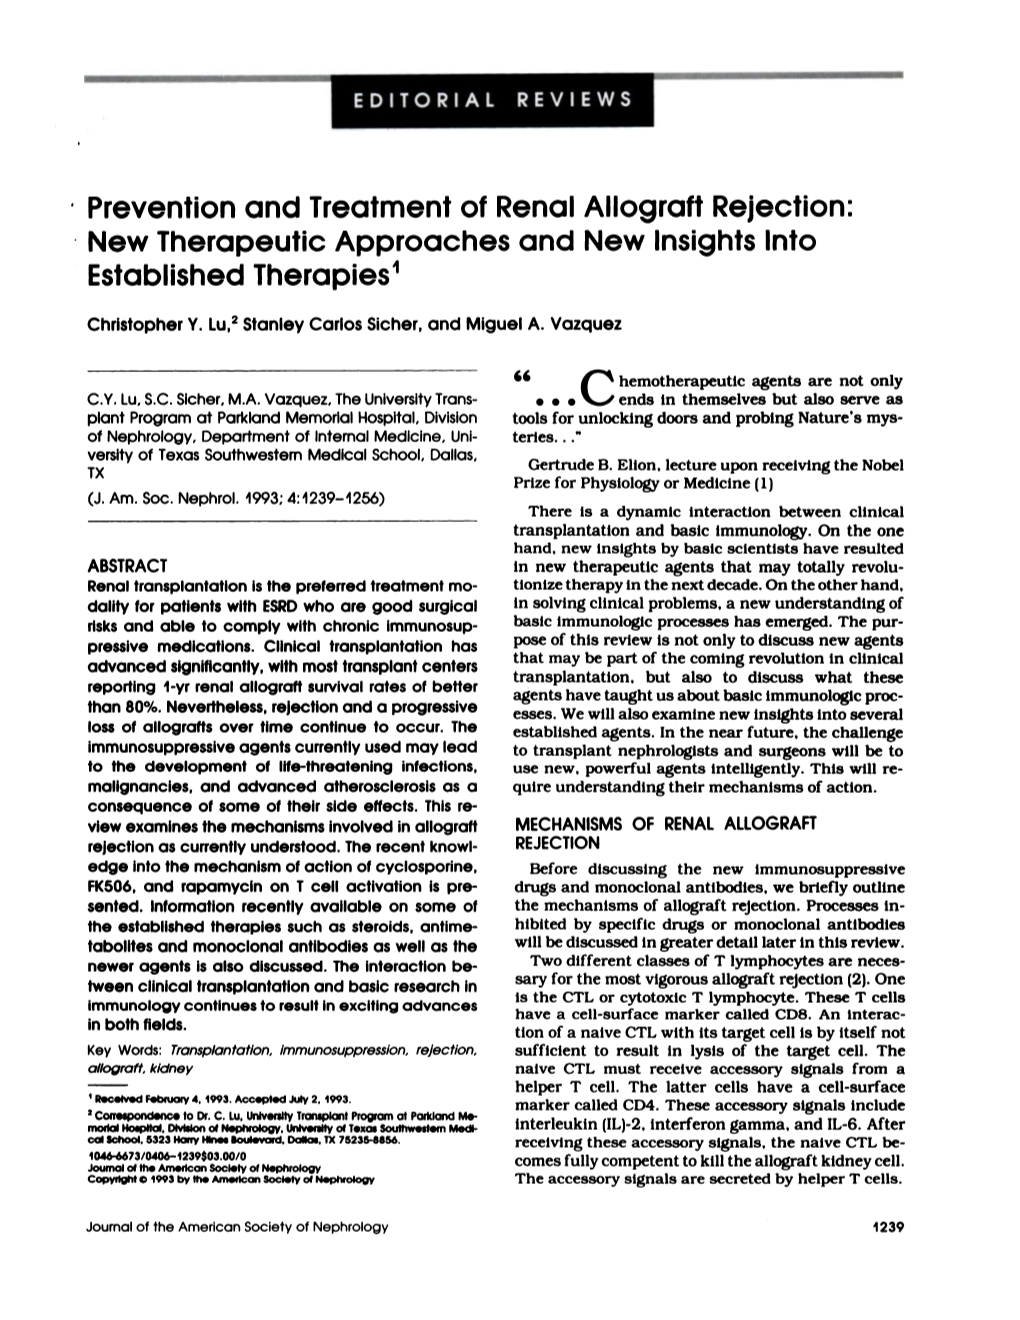 Prevention and Treatment of Renal Allograft Rejection: New Therapeutic Approaches and New Insights Into Established Therapies1